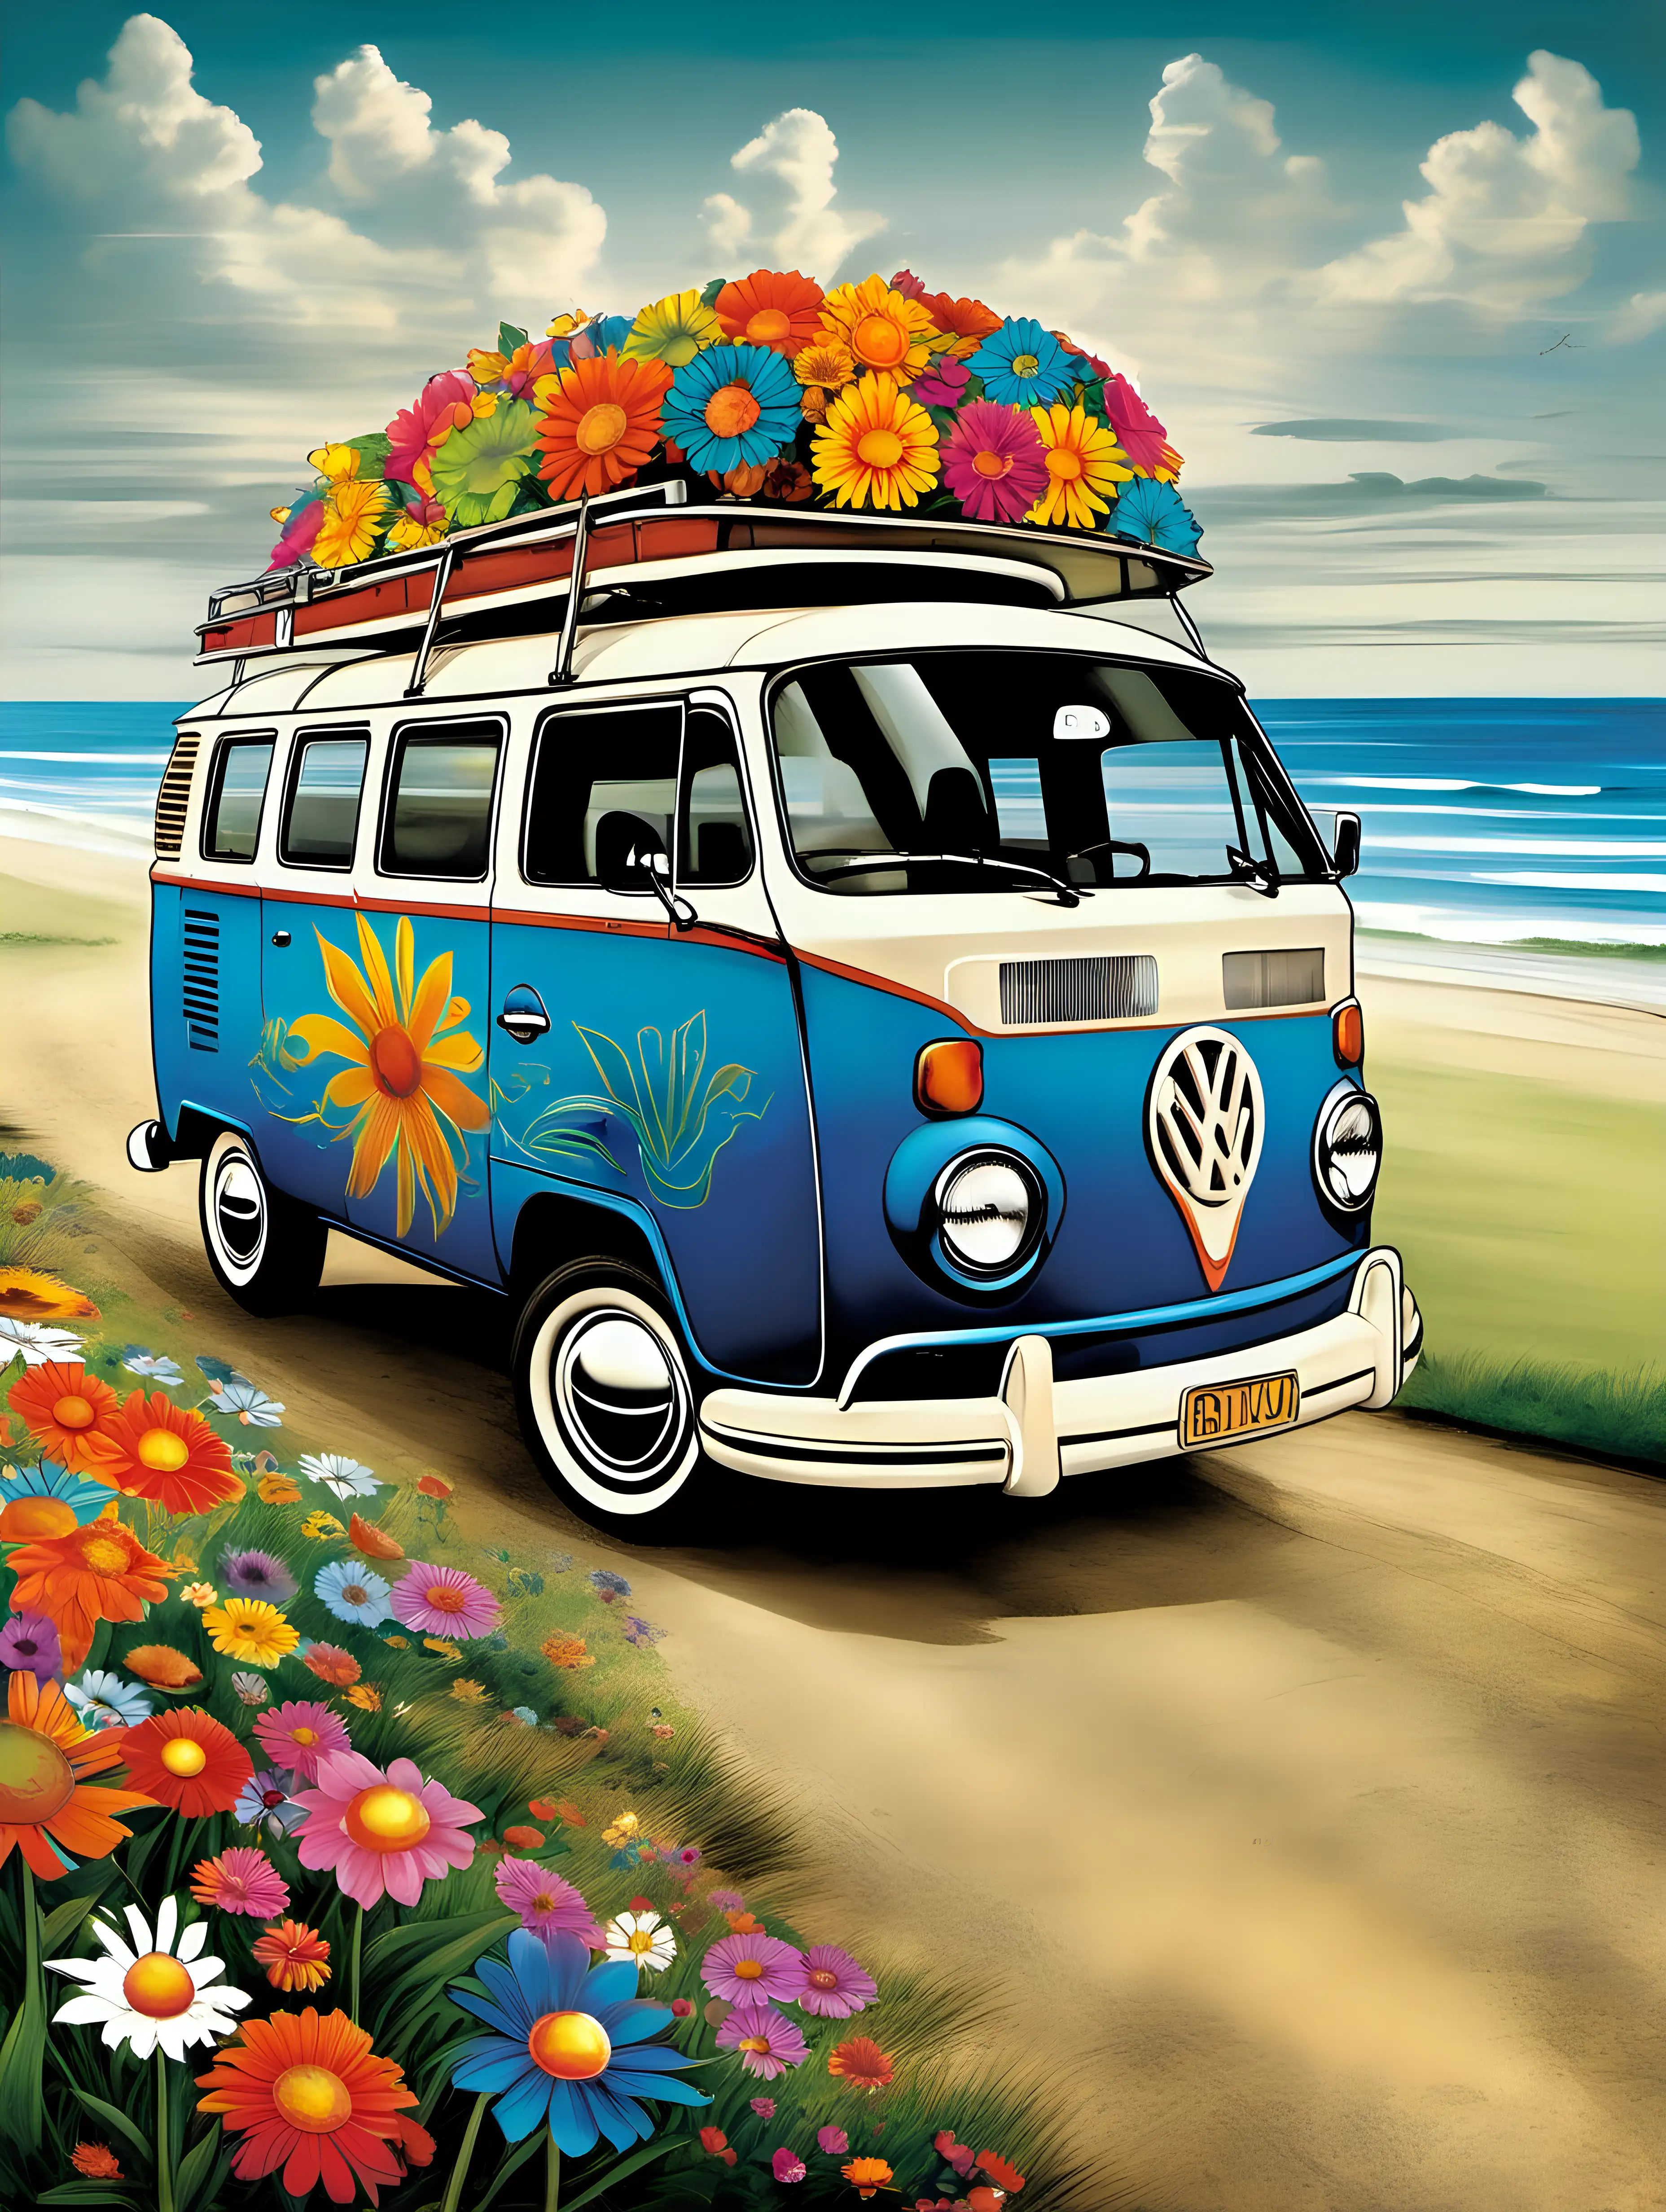 Create an image that embodies the concept of freedom through a vibrant depiction of a Kombi Van adorned with colorful flowers. Use your artistic skills to convey the carefree spirit of the open road, the 1960s or 1970s counterculture, and the sense of adventure associated with these iconic vehicles. Infuse the scene with a sense of nostalgia and the joy of journeying into the unknown or beaches no text 